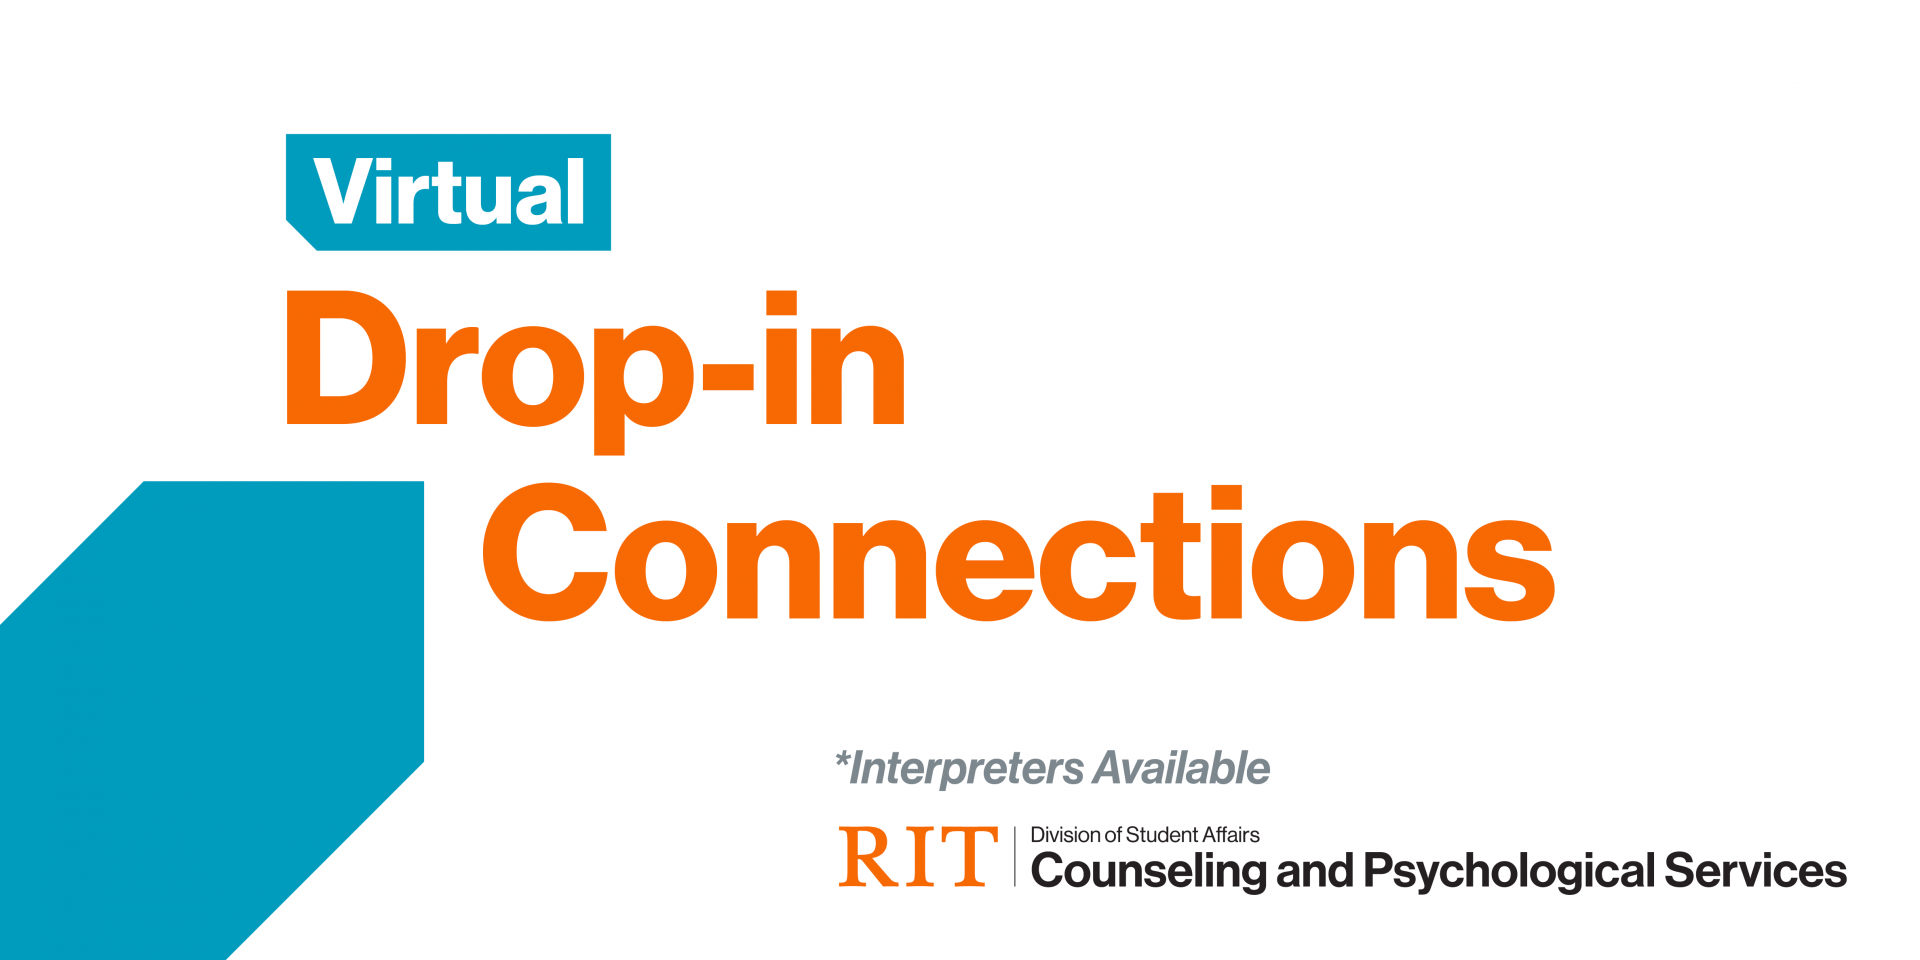 Virtual Drop-in Connections with Counseling and Psychological Services Interpreters Available